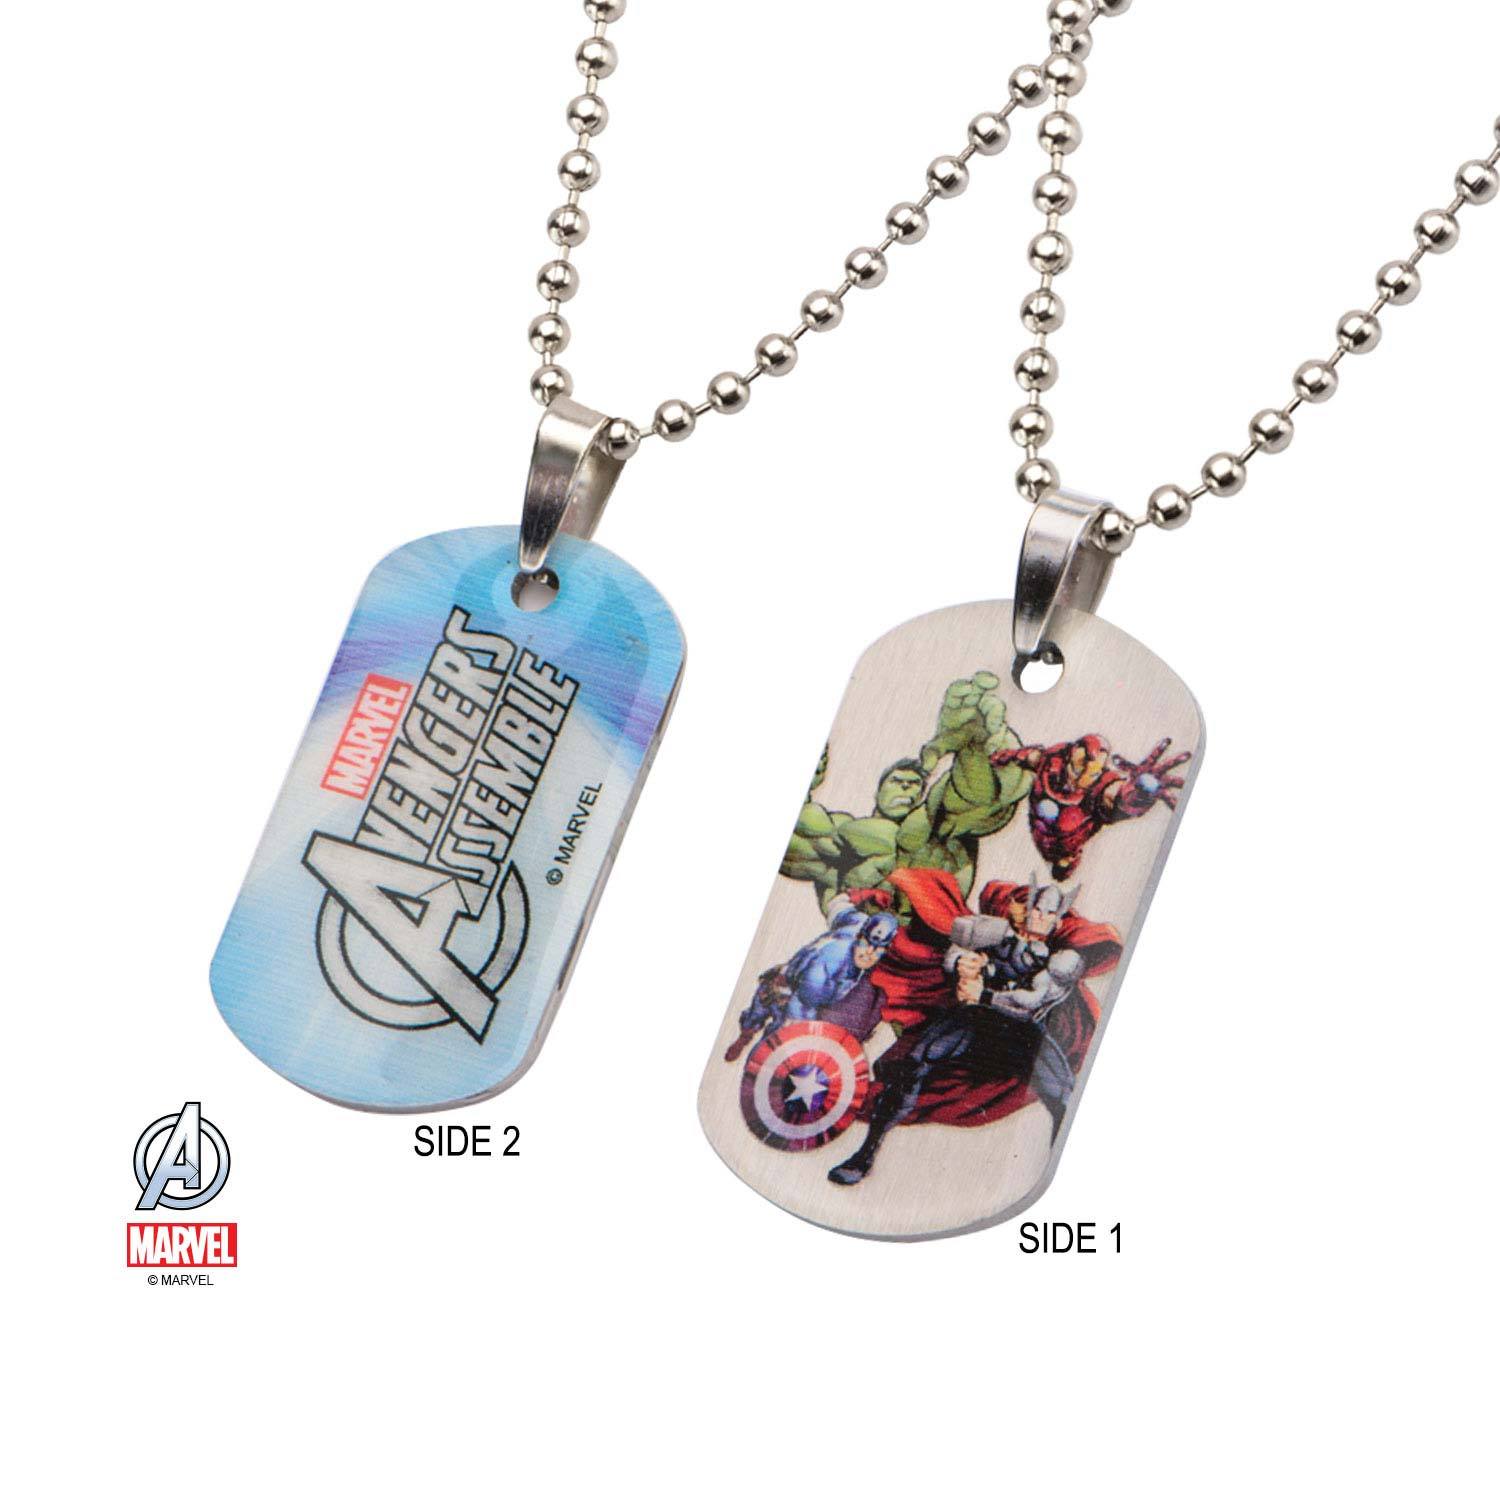 Marvel Avengers Assemble Dog Tag Kids' Pendant Necklace [NOT AVAILABLE]